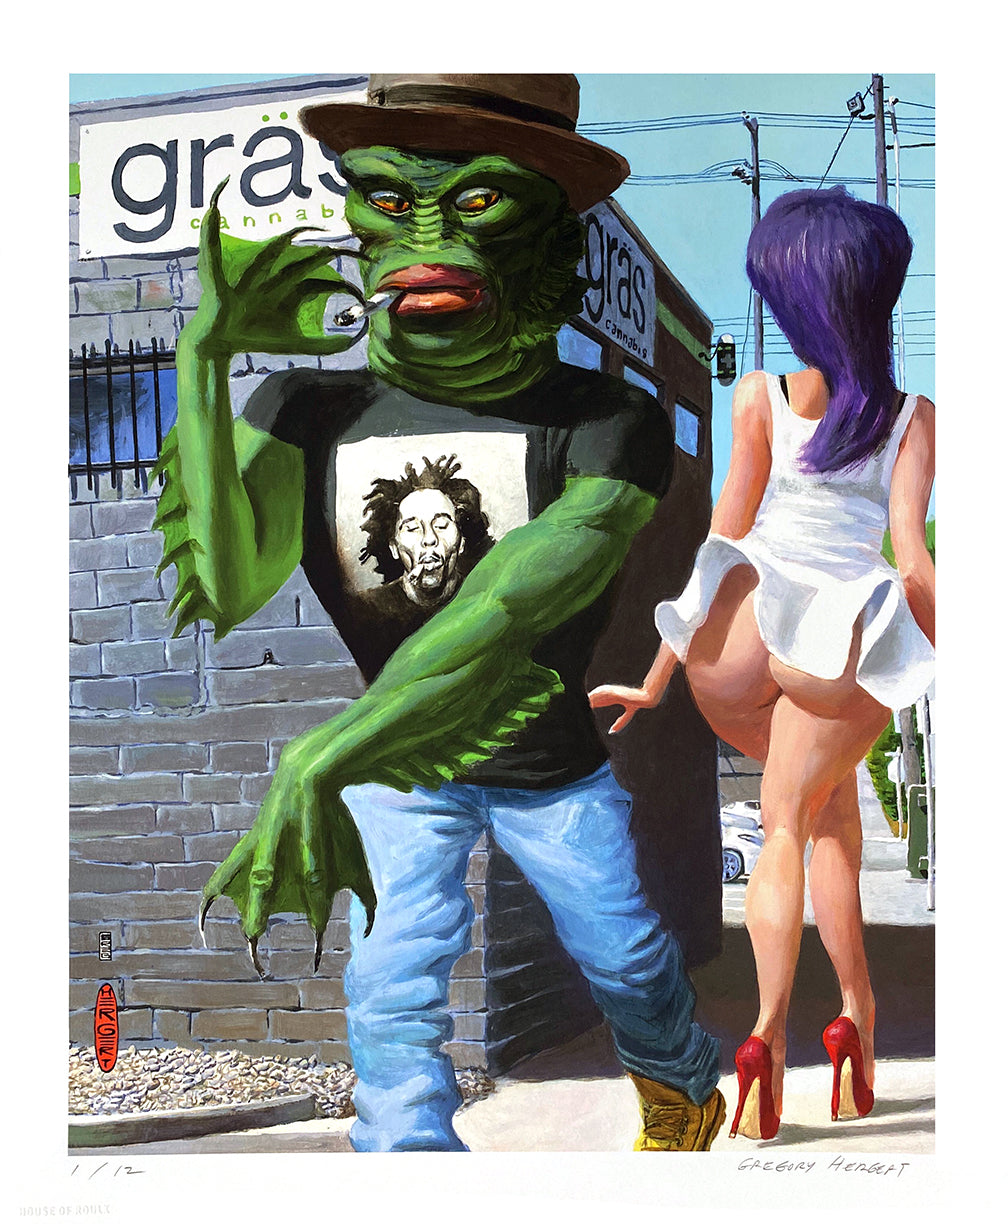 Gregory Hergert &quot;Gras&quot; - Archival Print, Limited Edition of 12 - 14 x 17&quot;